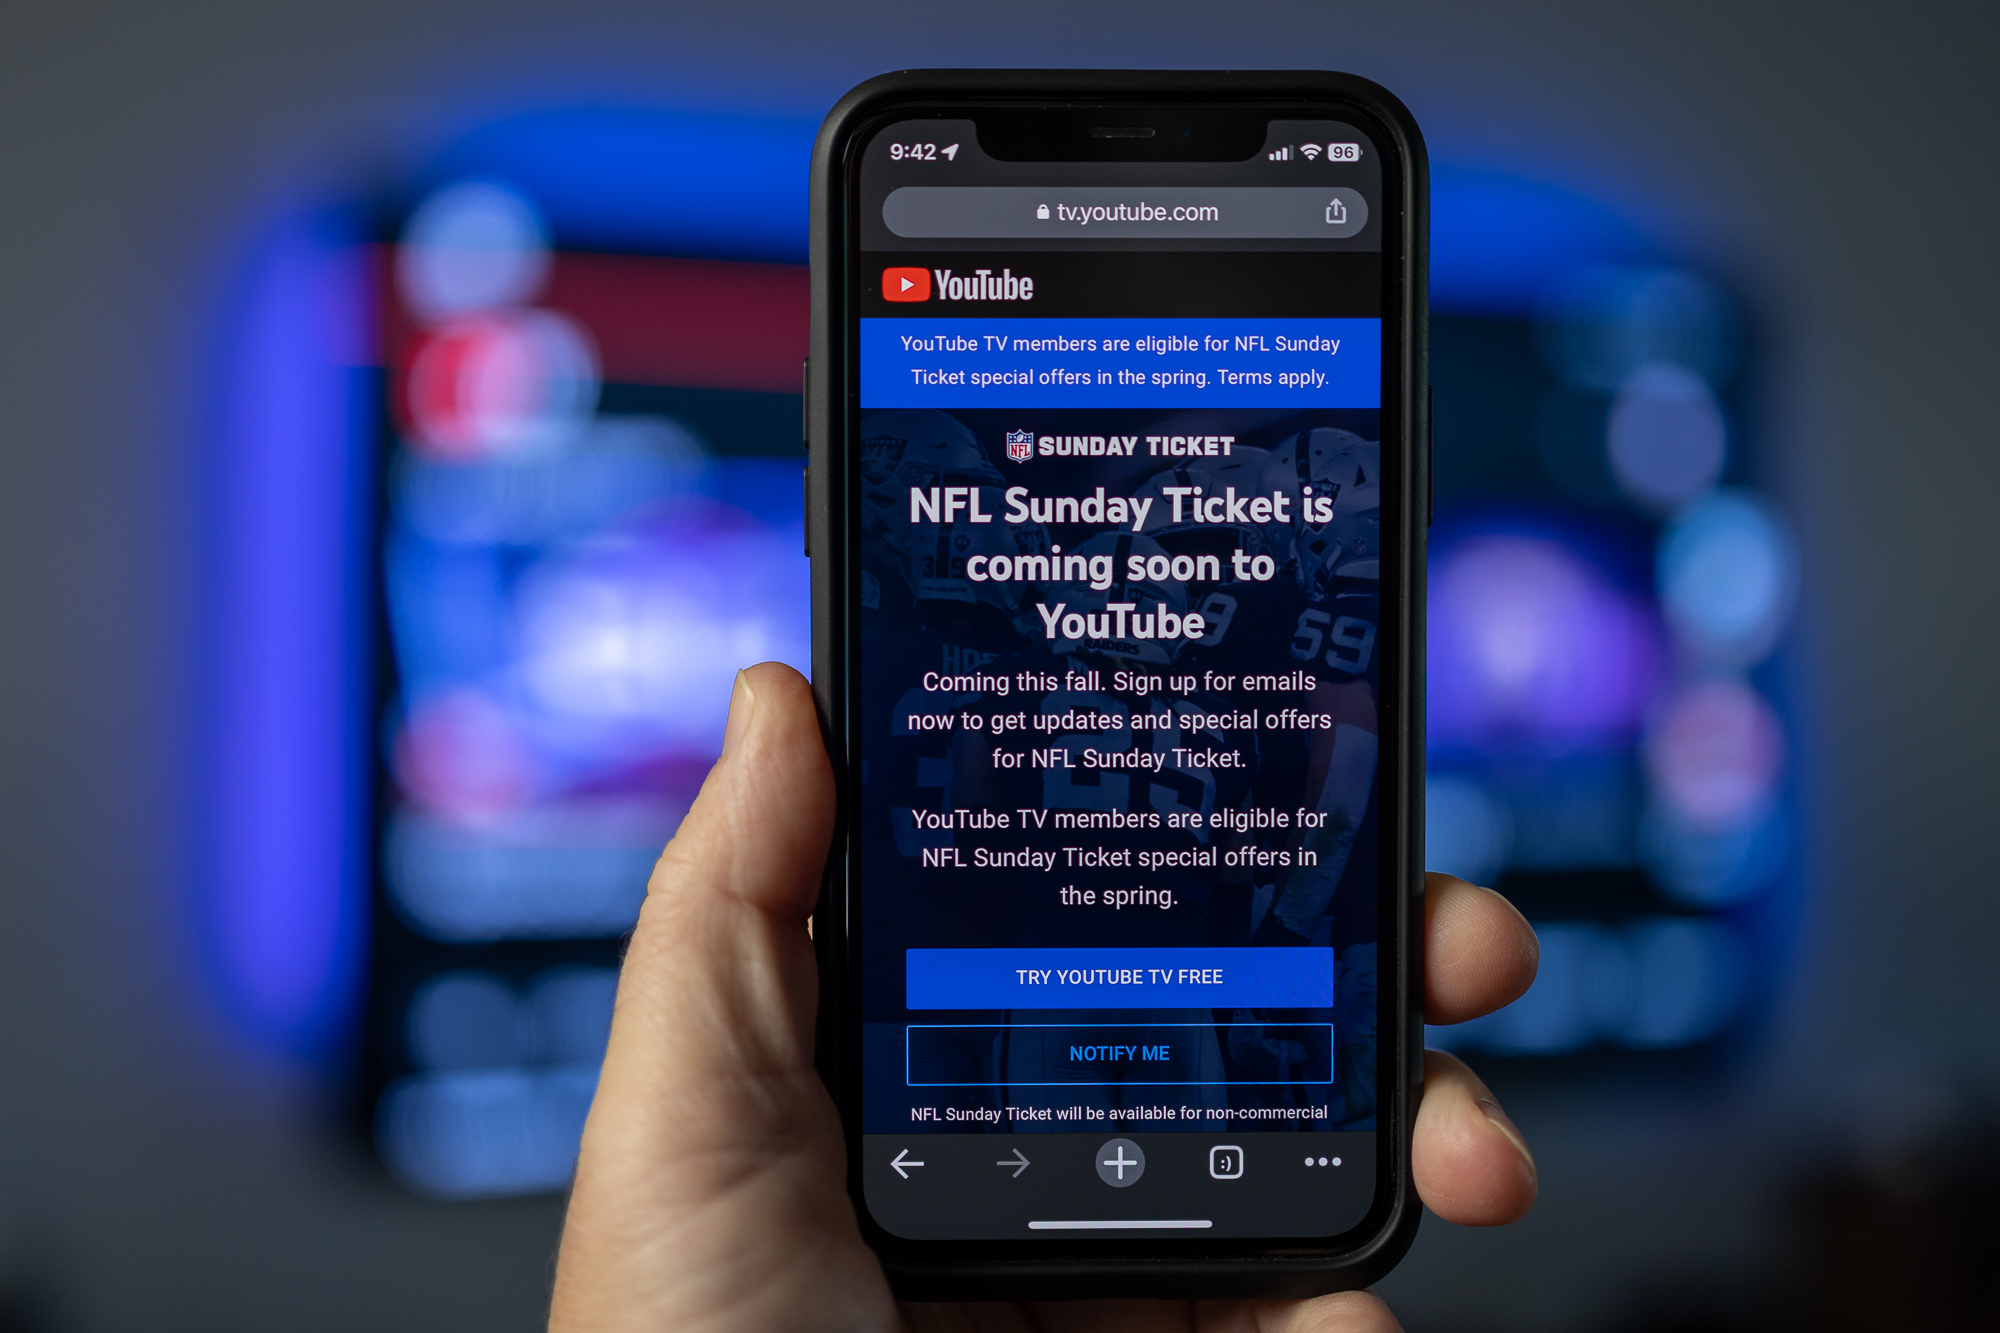 Verizon is giving away NFL Sunday Ticket for free